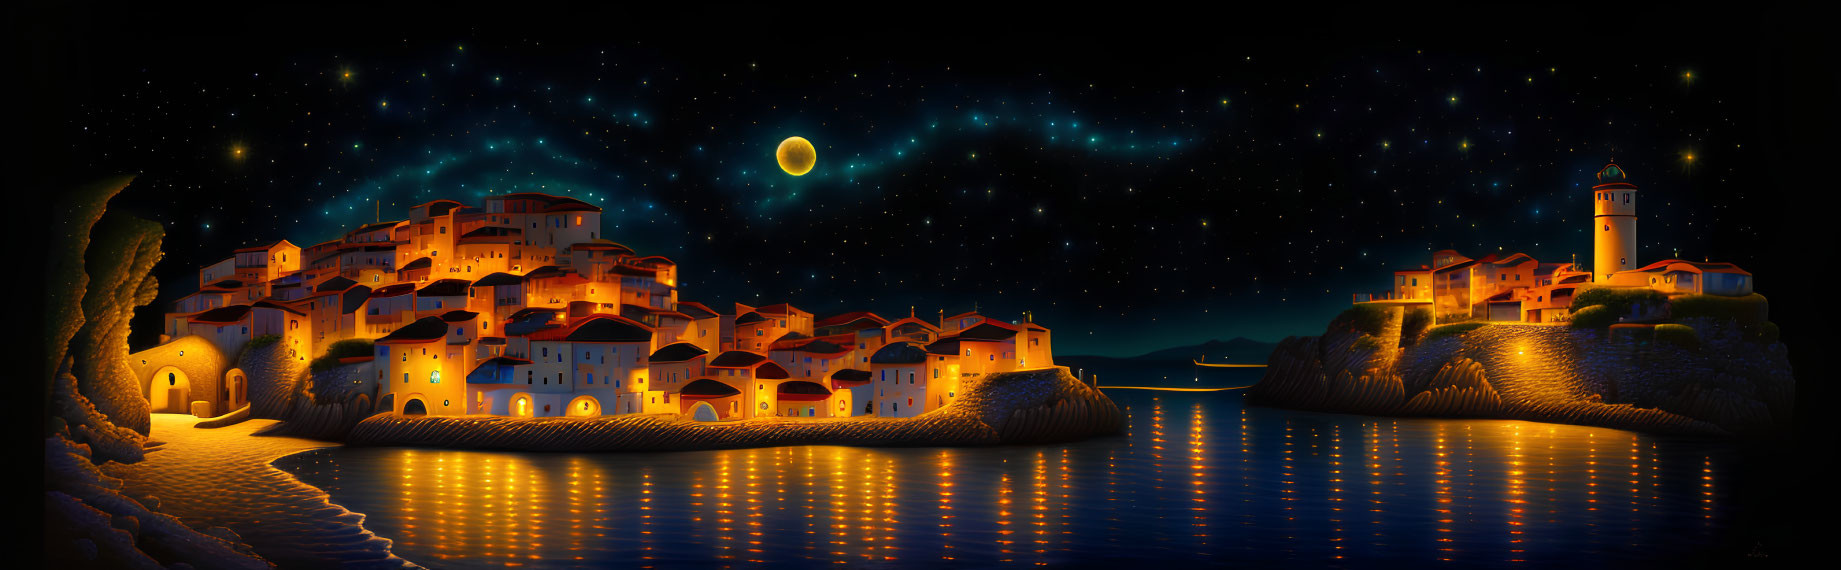 Panoramic Mediterranean village night scene with starry skies, glowing buildings, lighthouse, and moon